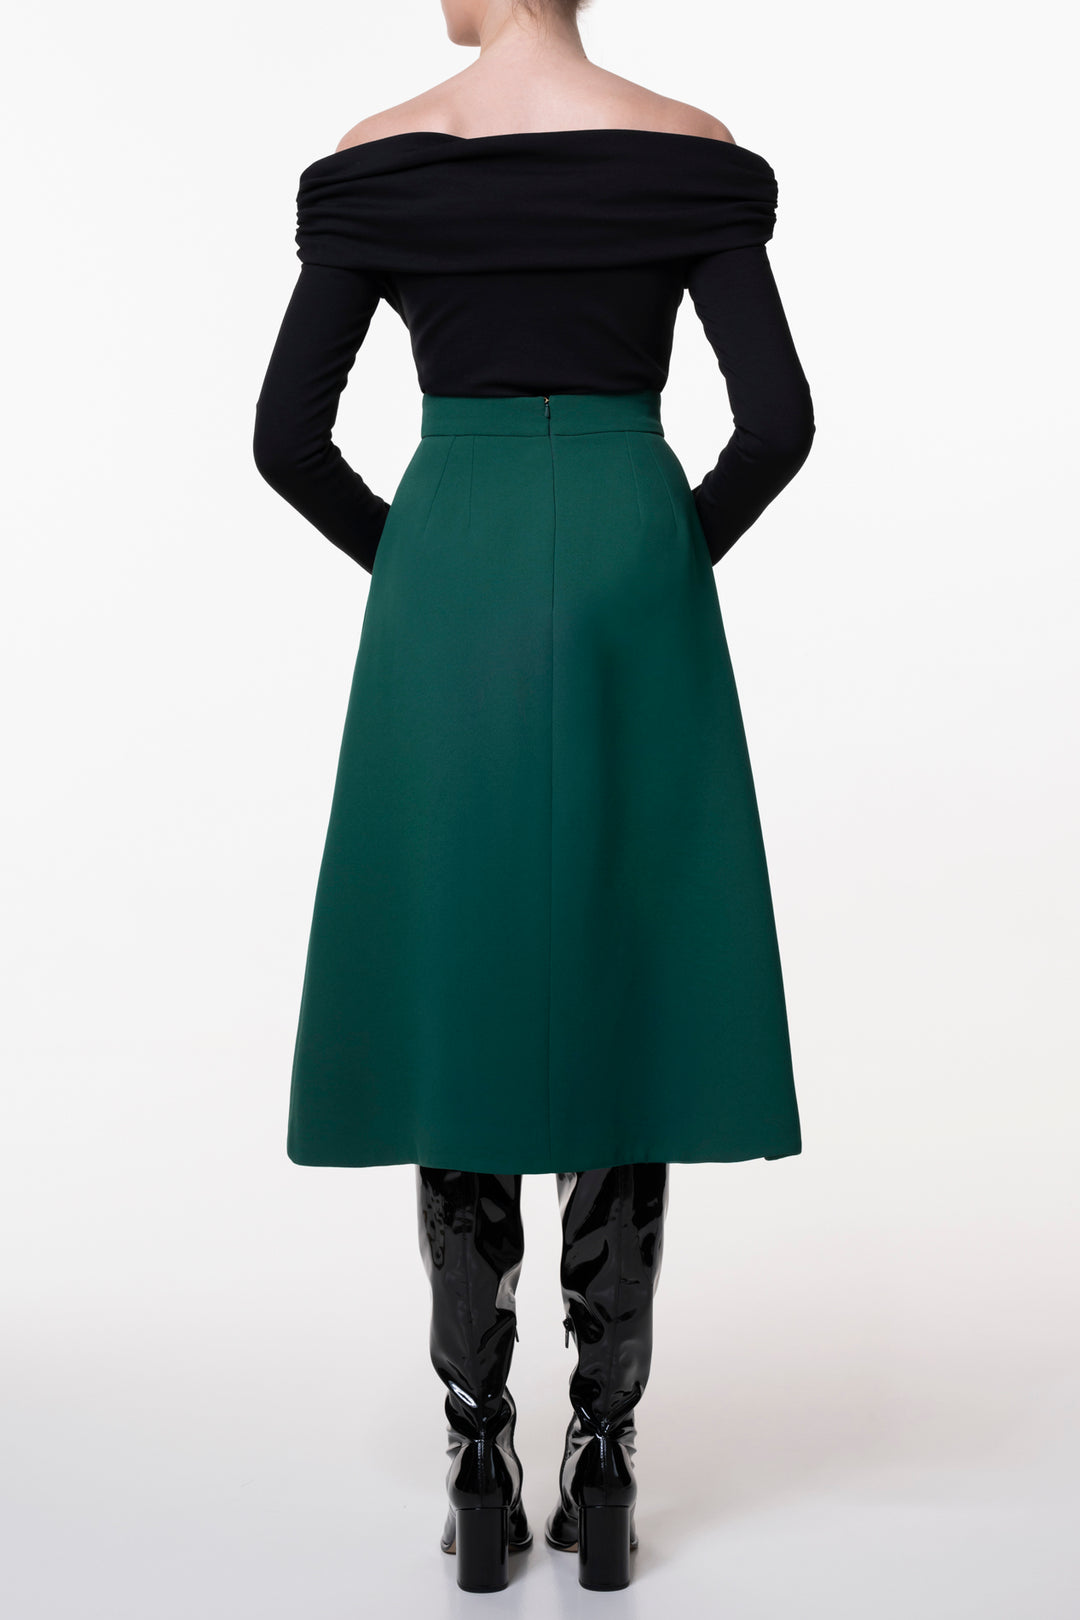 Emerald Crepe Midi Skirt With Golden Front Buttons